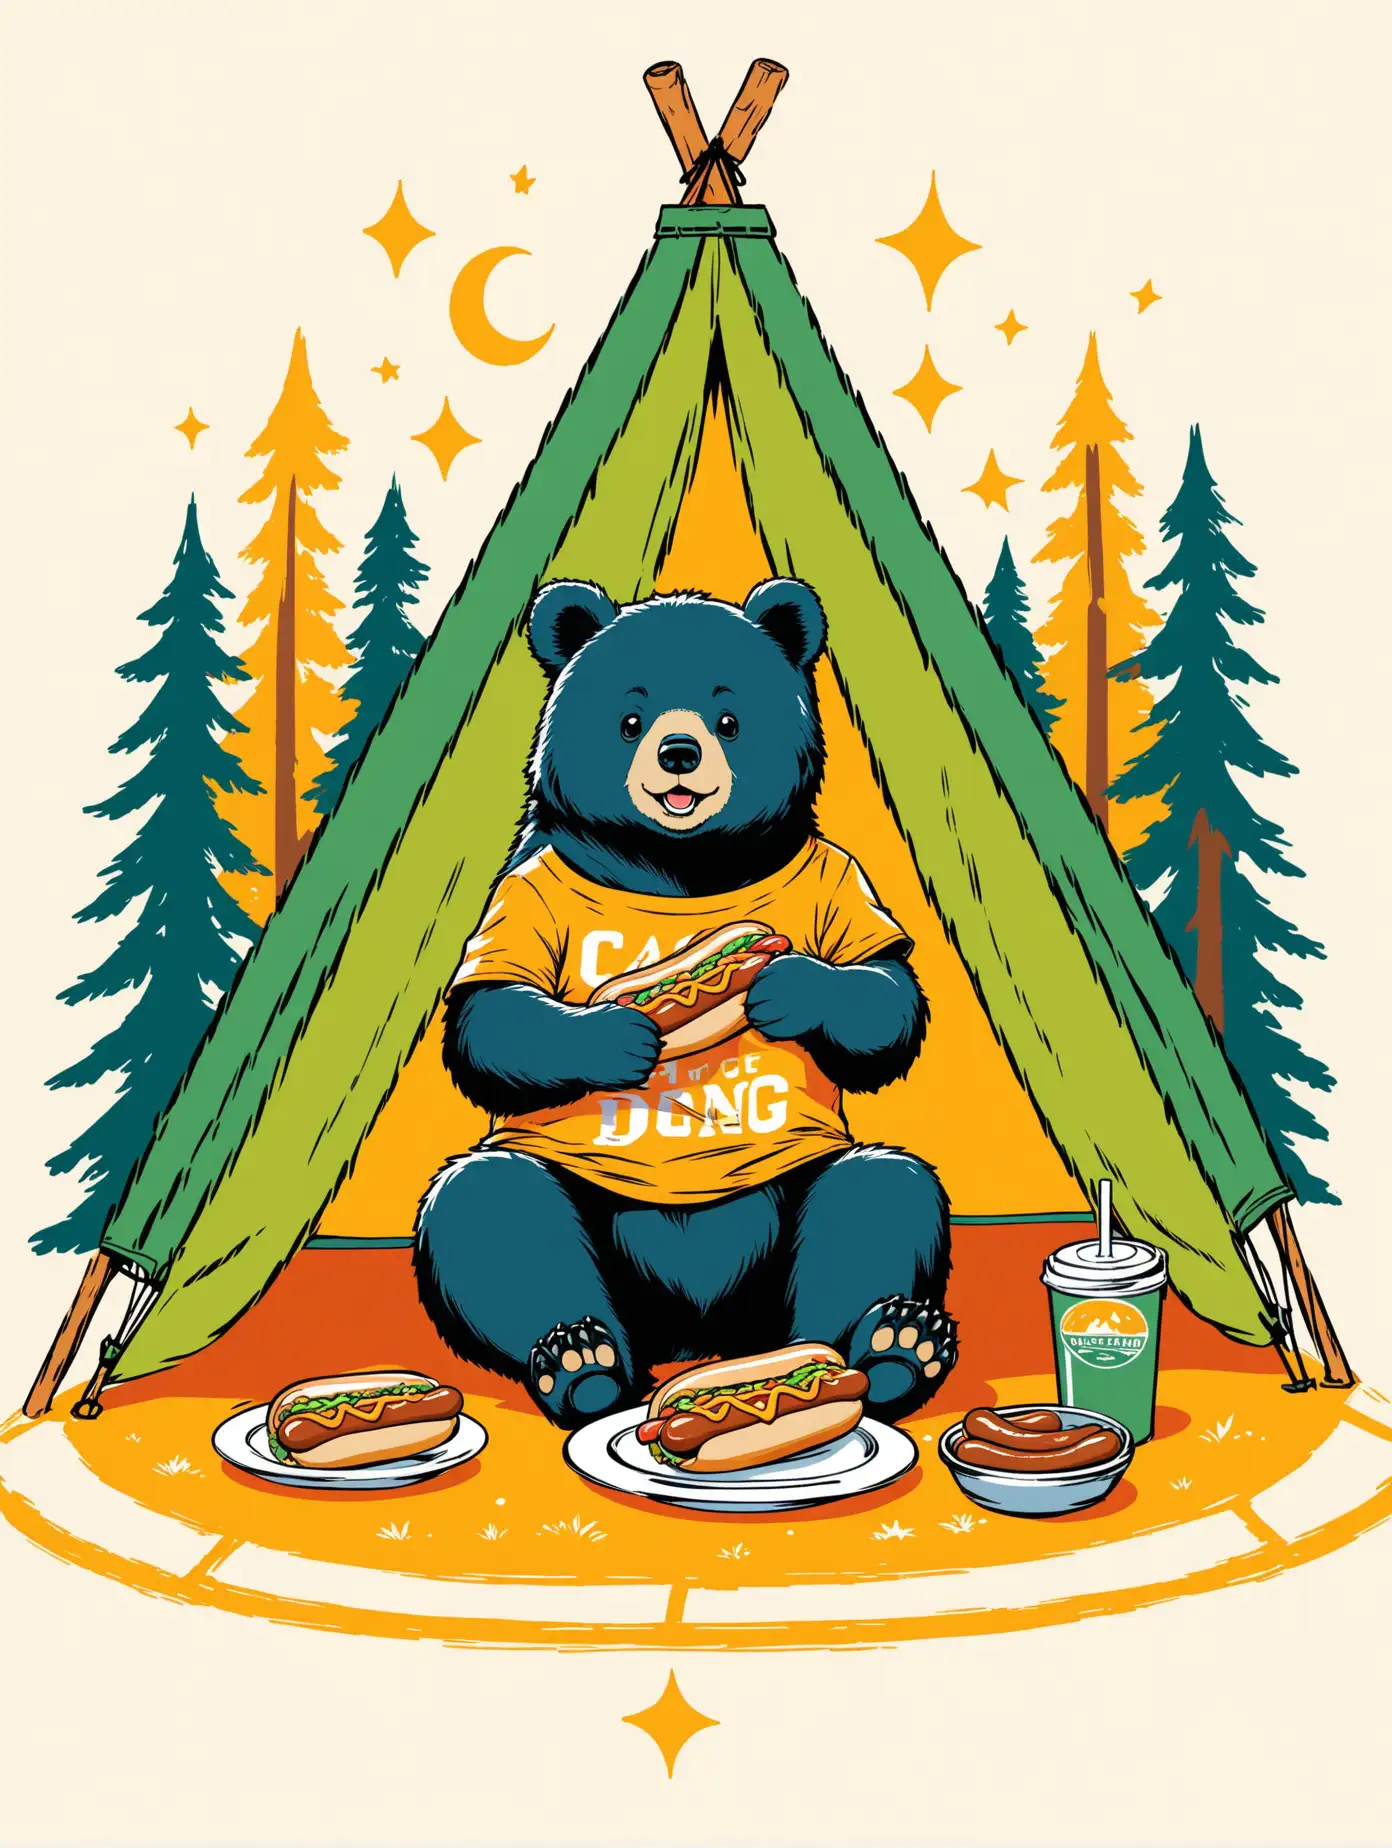 screen print of a black bear sitting inside a camping tent eating a hot dog, in the style of a boy's graphic tee shirt graphic, fun and colorful